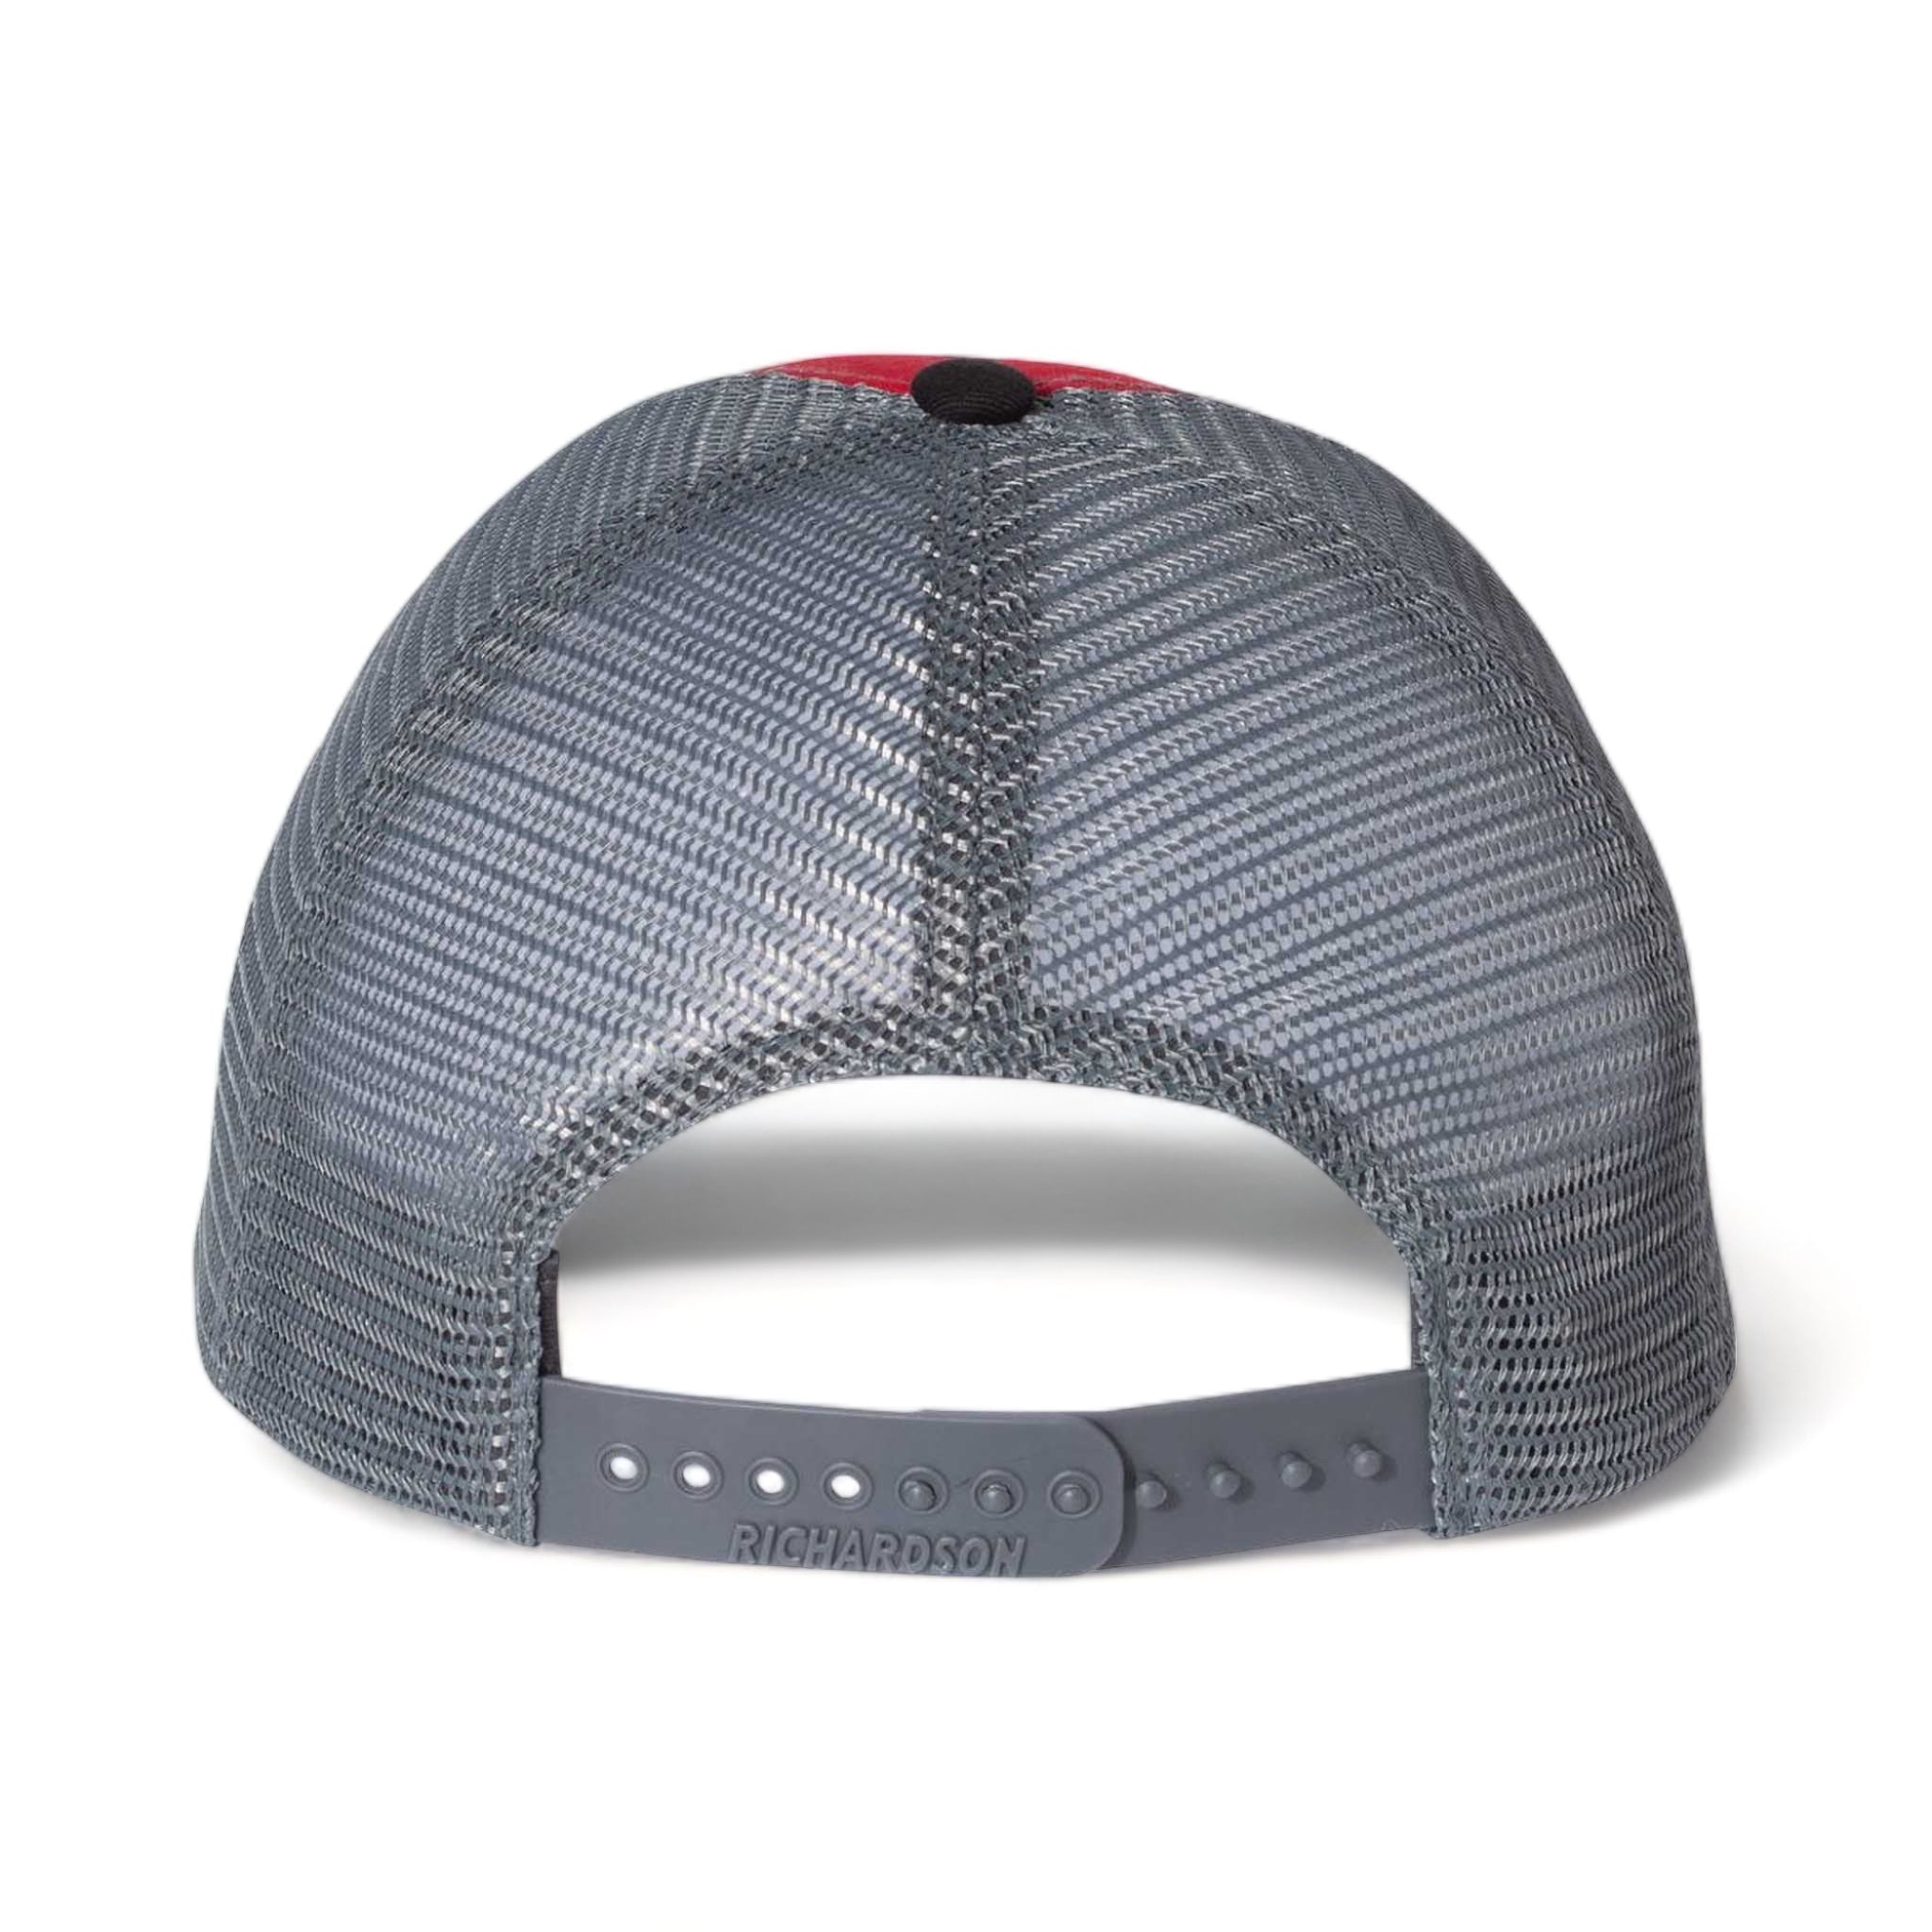 Back view of Richardson 111 custom hat in red, charcoal and black